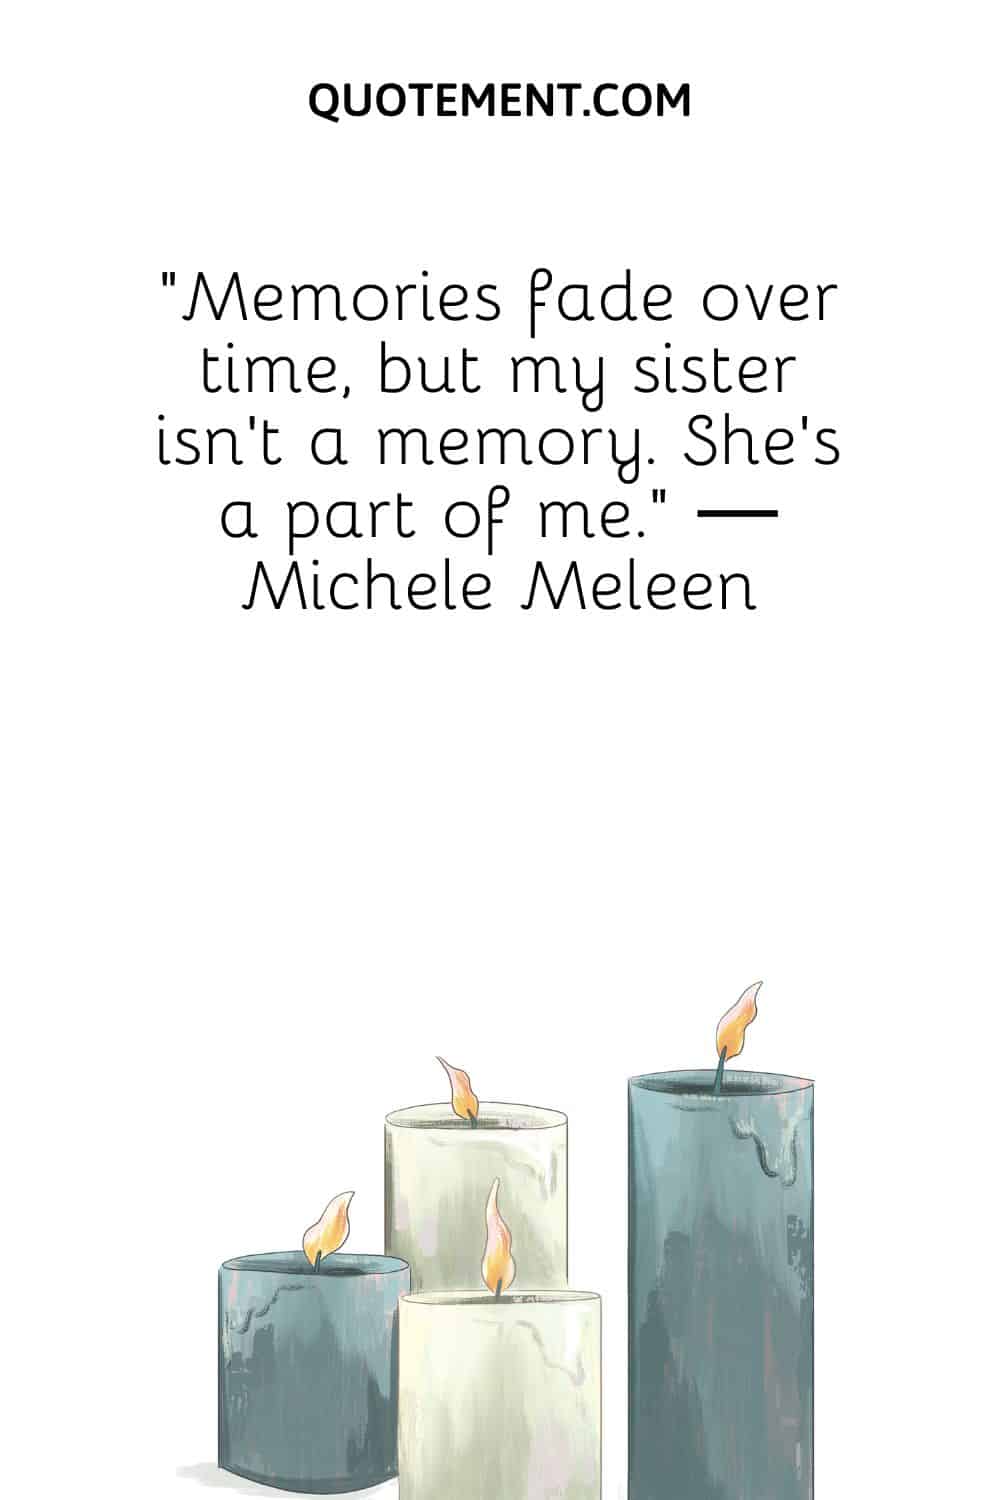 “Memories fade over time, but my sister isn't a memory. She's a part of me.” ― Michele Meleen